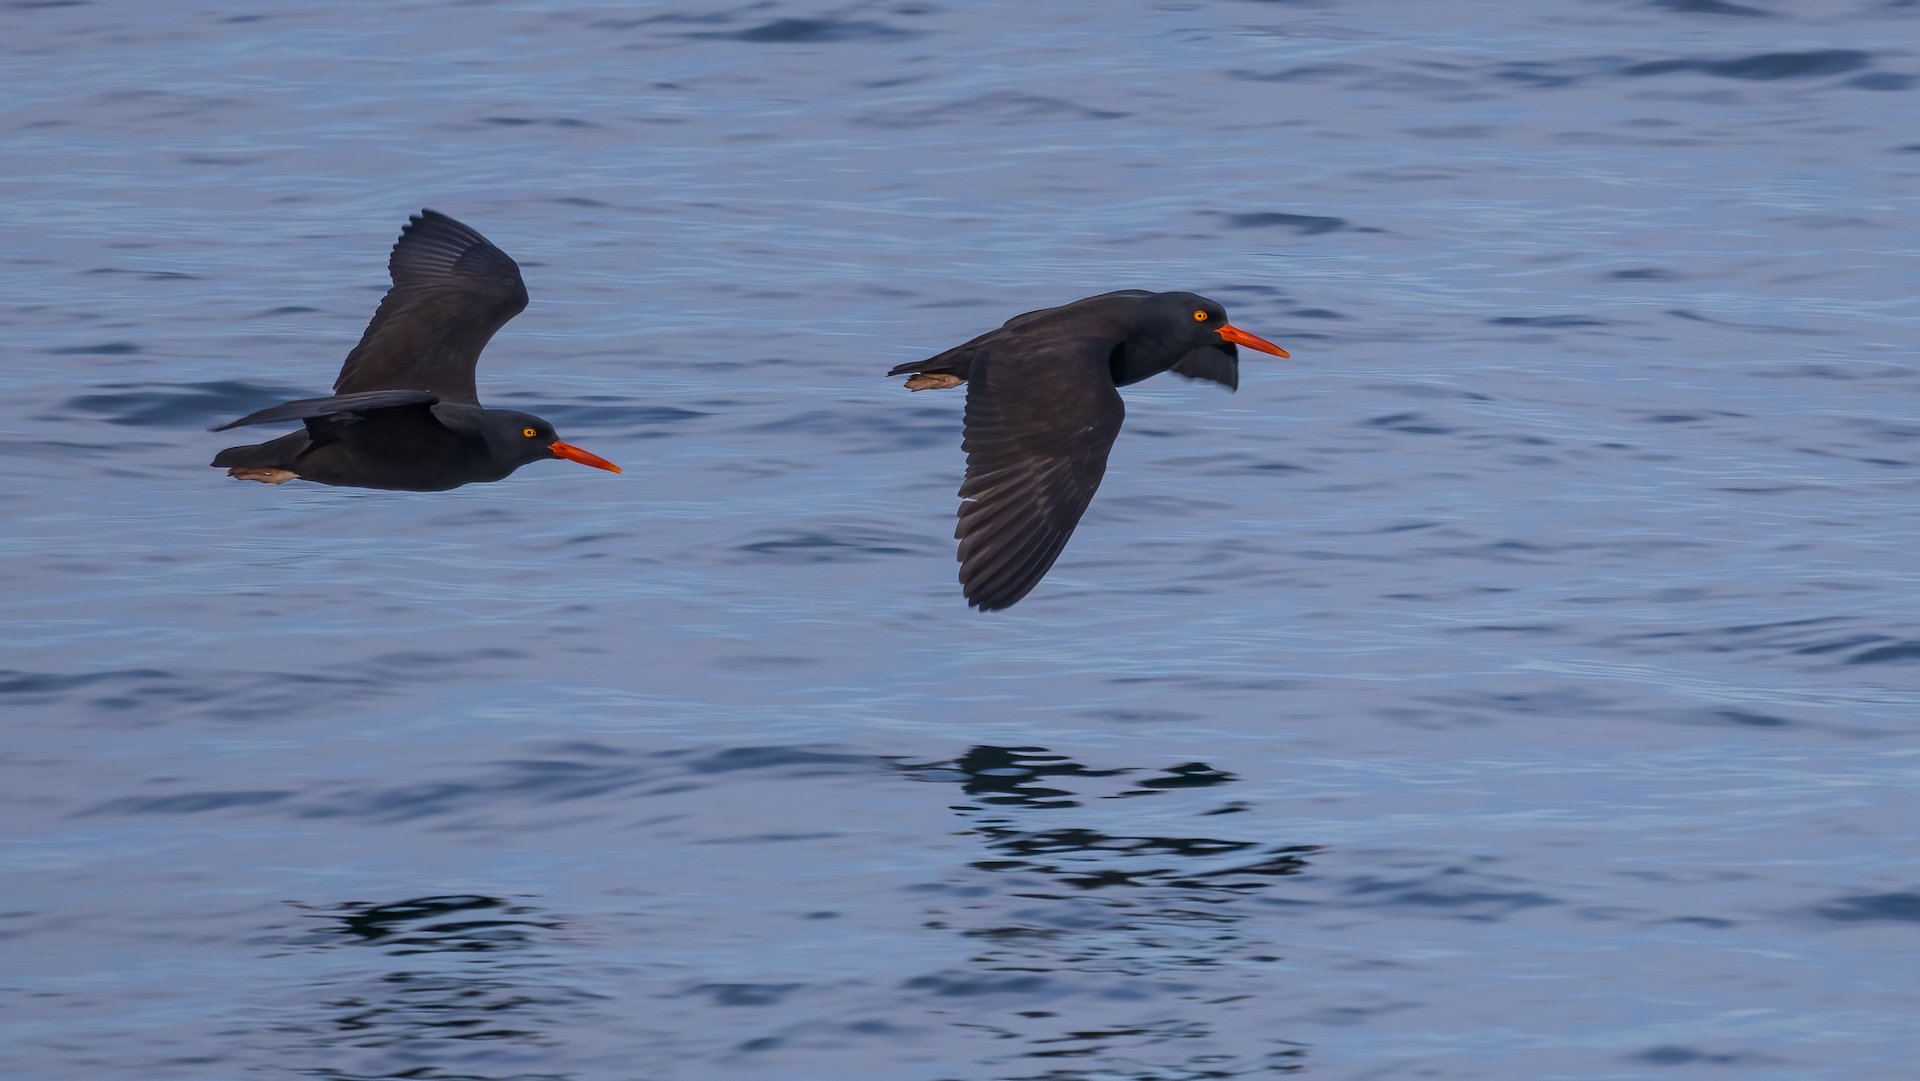  More oystercatchers 